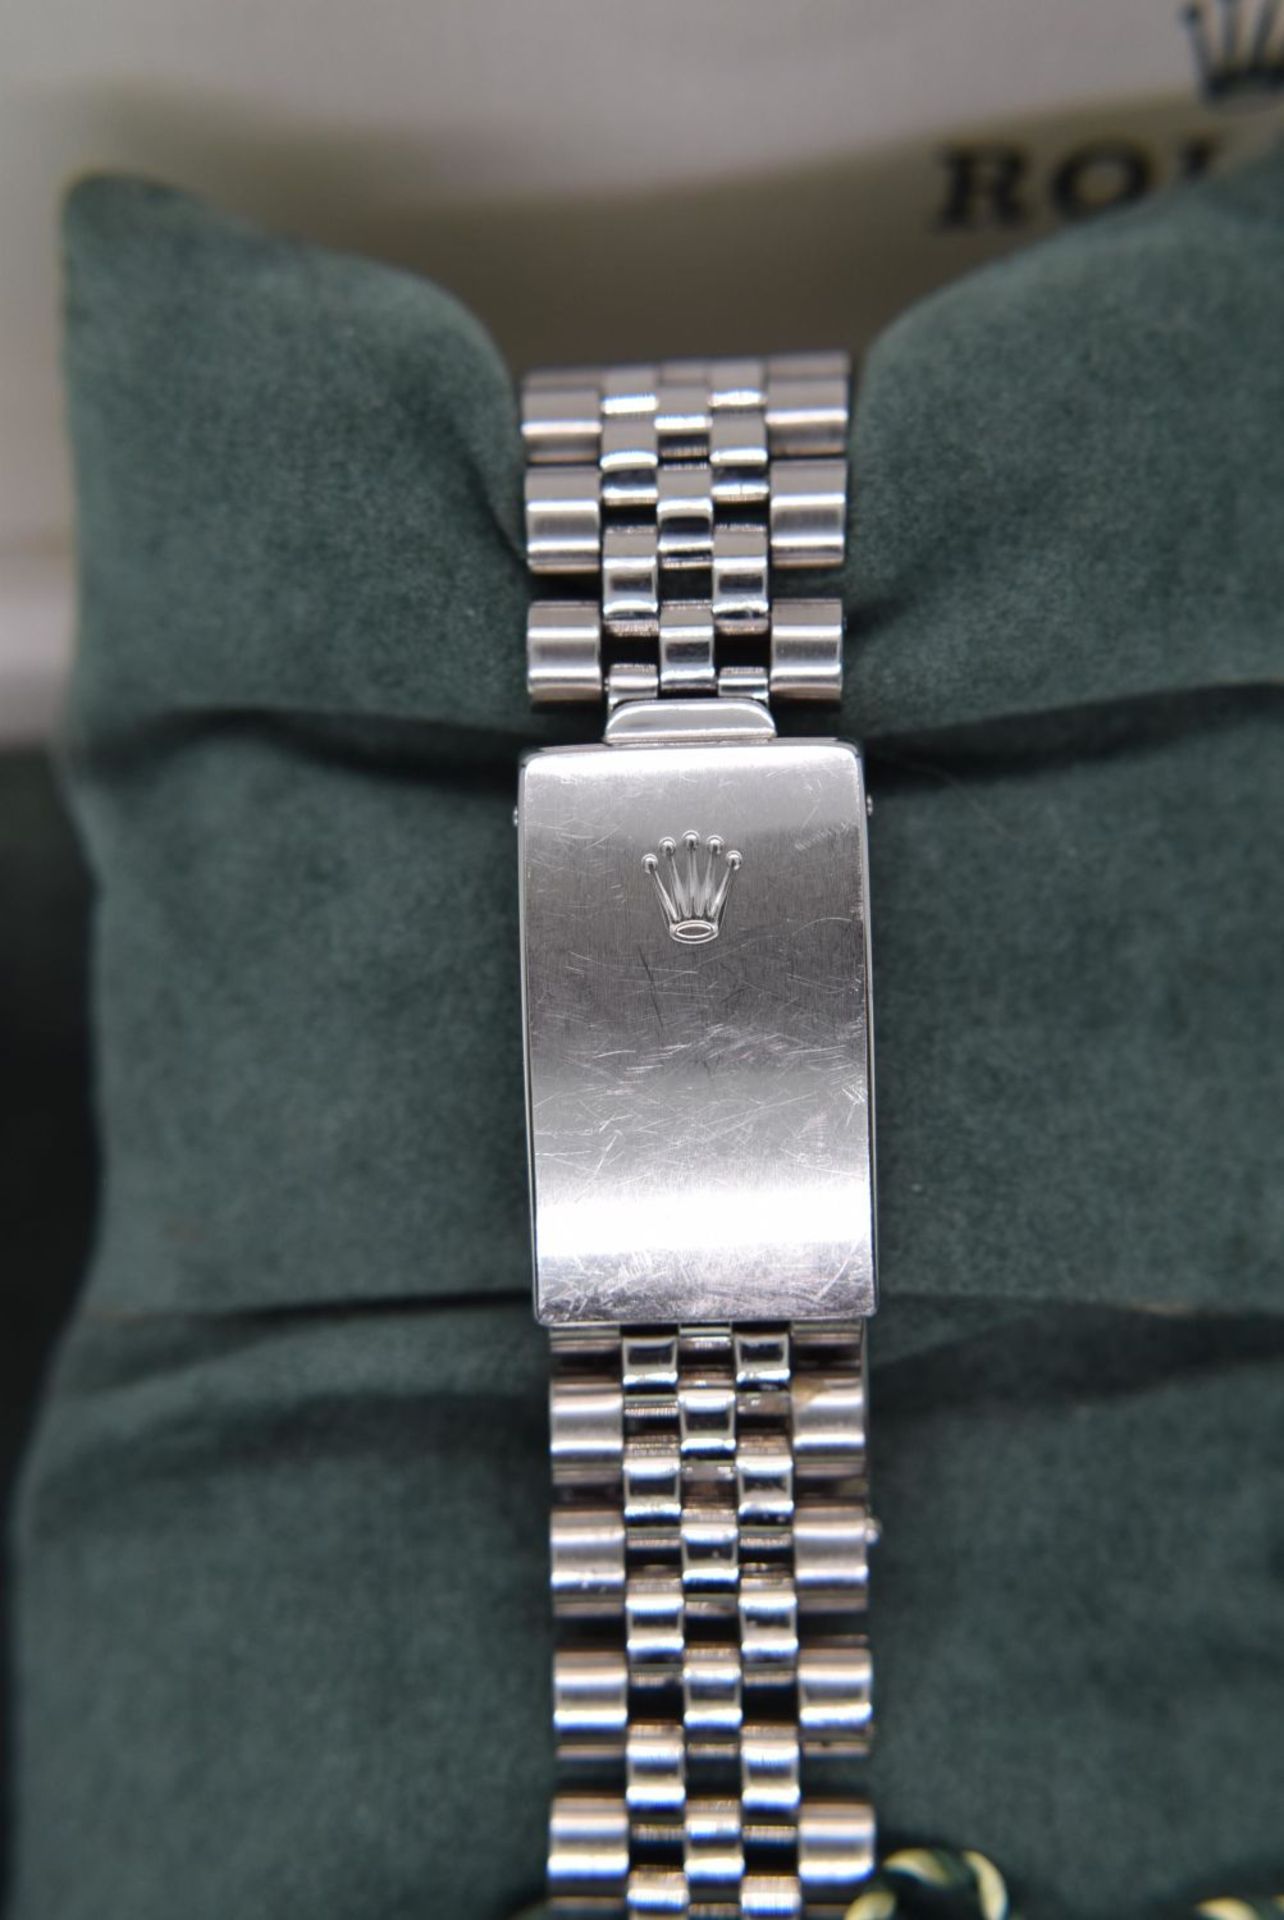 ROLEX DATEJUST 36MM STAINLESS STEEL MODEL WITH JUBILEE BRACELET (SILVER DIAL, FLUTED BEZEL) - Image 3 of 8